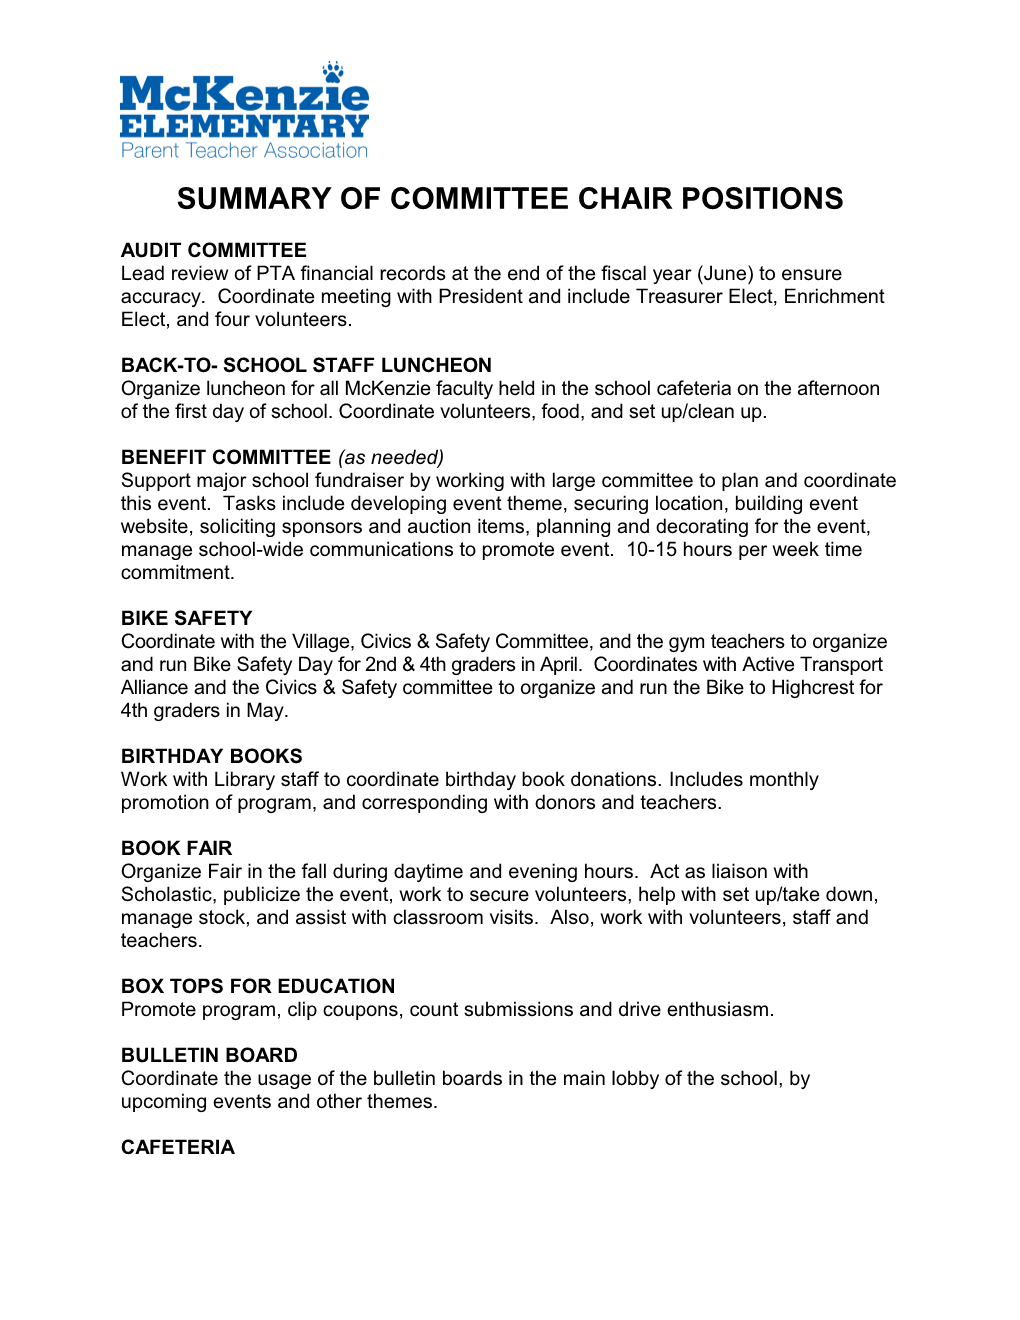 Summary of Committee Chair Positions